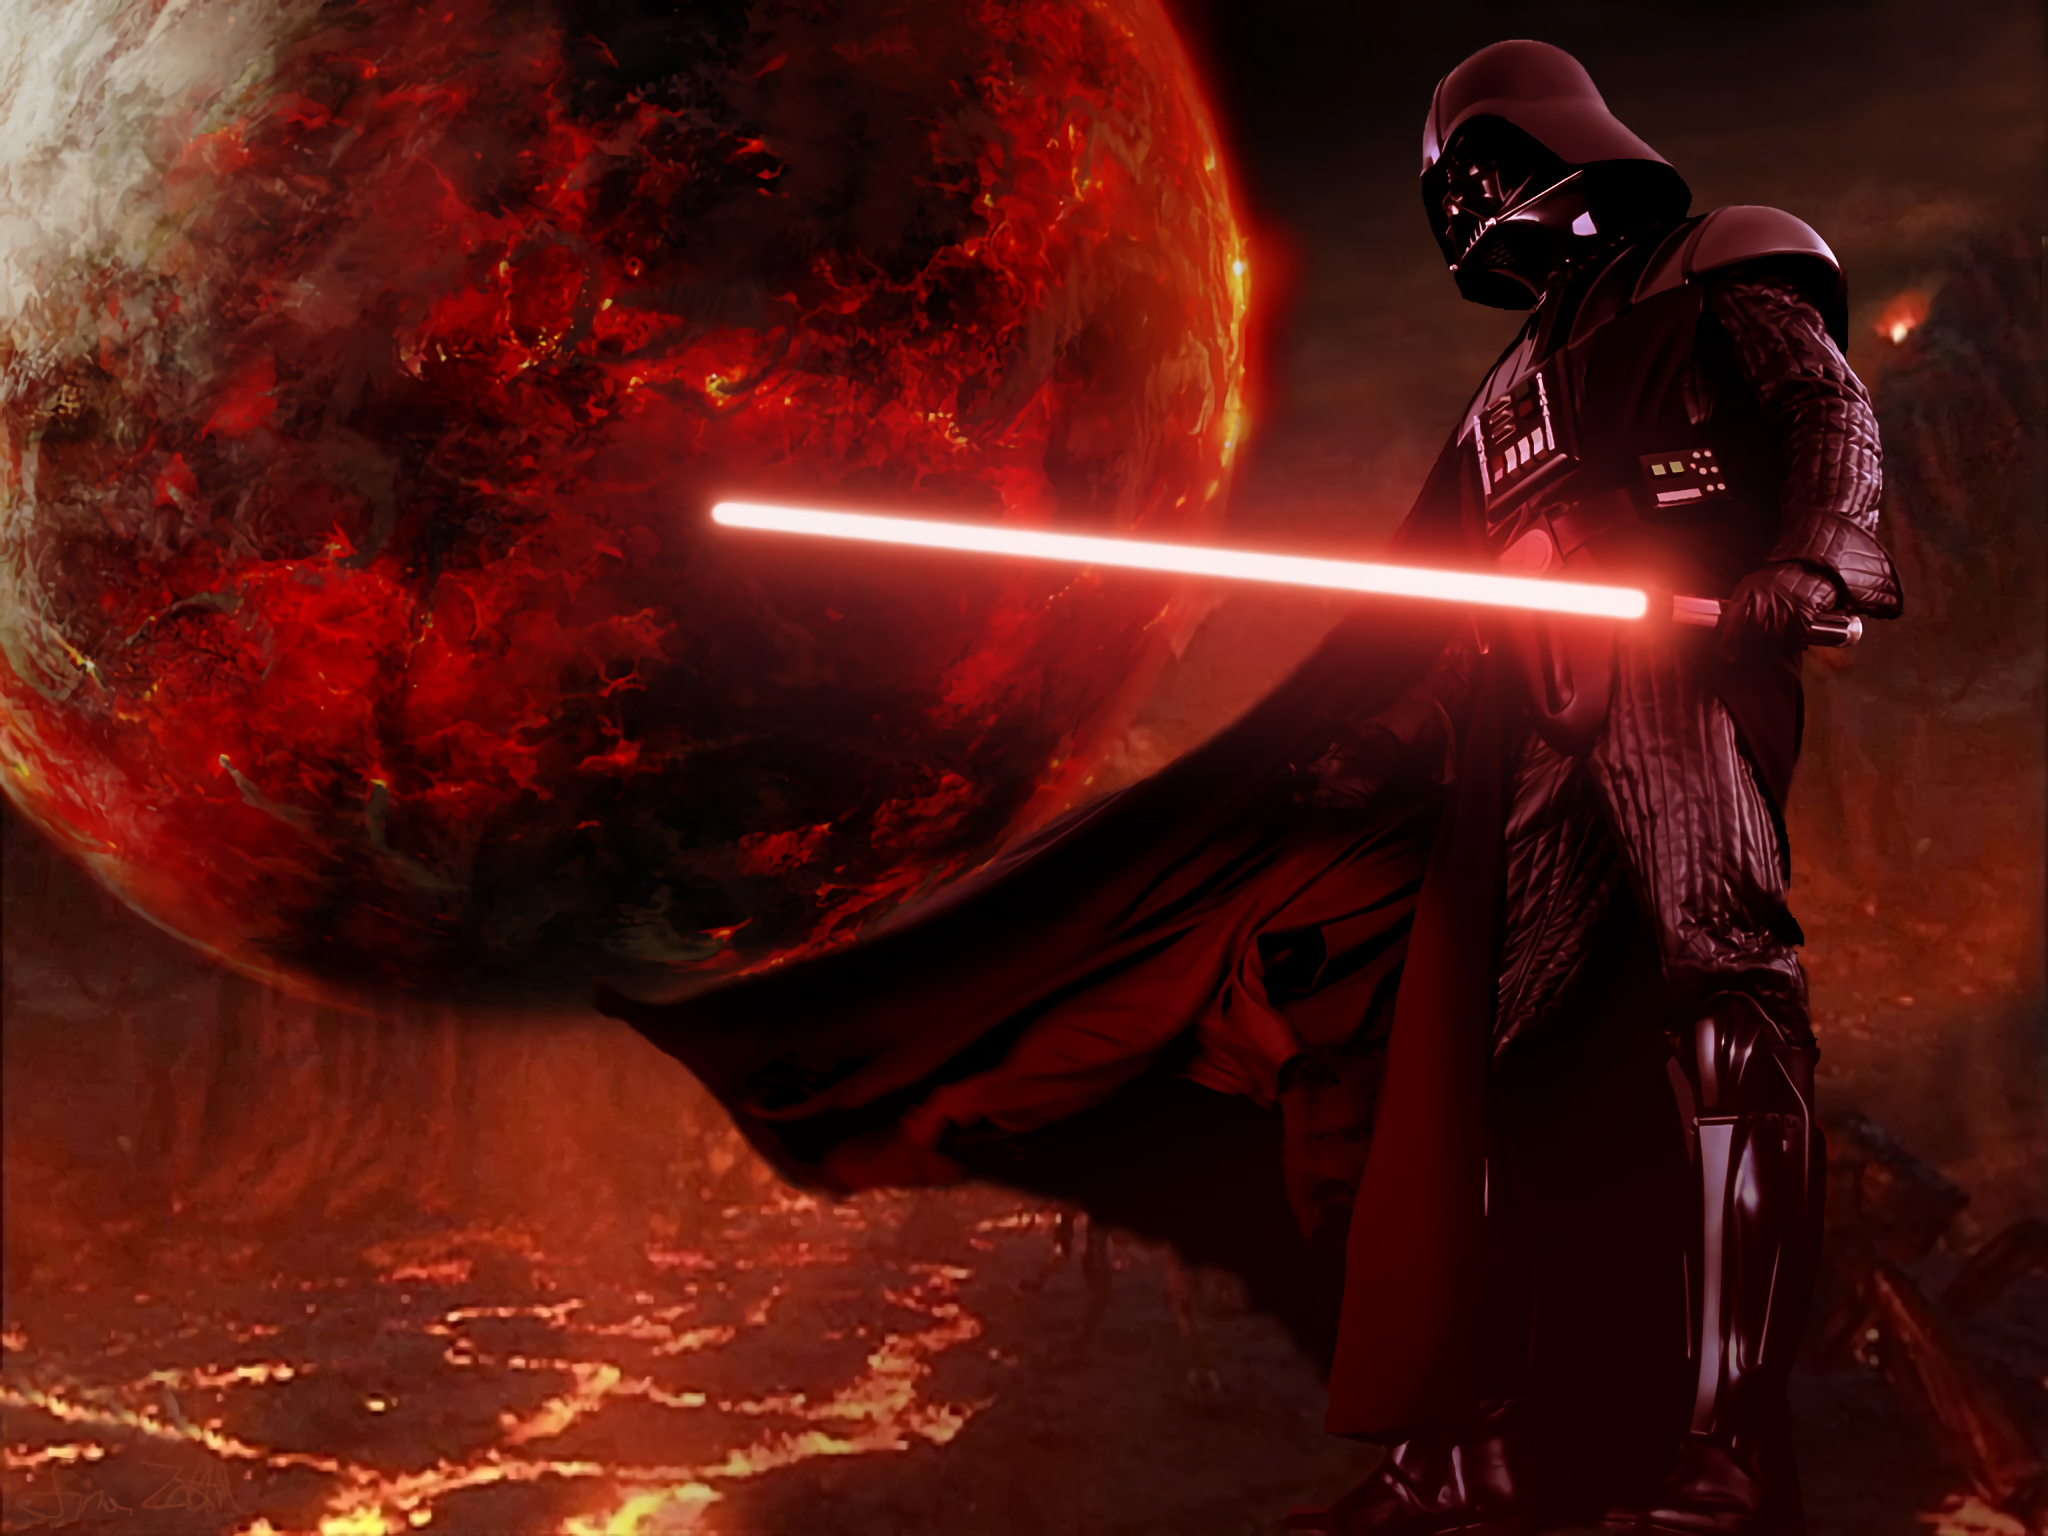 Free download 592 Star Wars HD Wallpapers Backgrounds [2048x1536] for